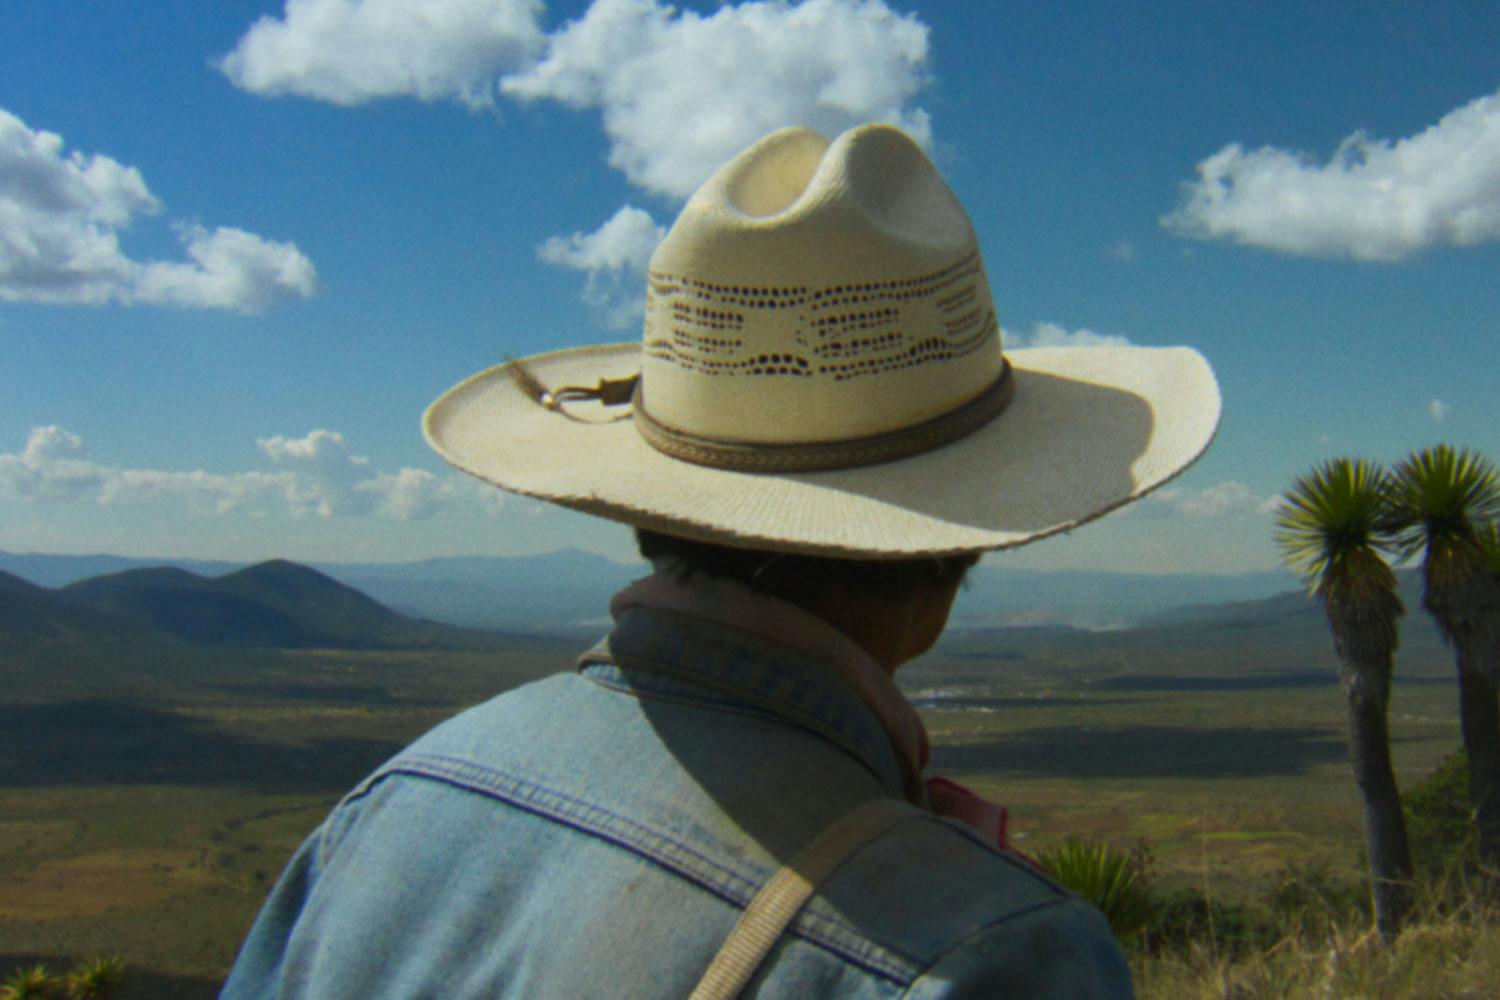 Roberto de la Rosa faces away, looking down at a vast, green valley, wearing a wide-brimmed hat and jean jacket.